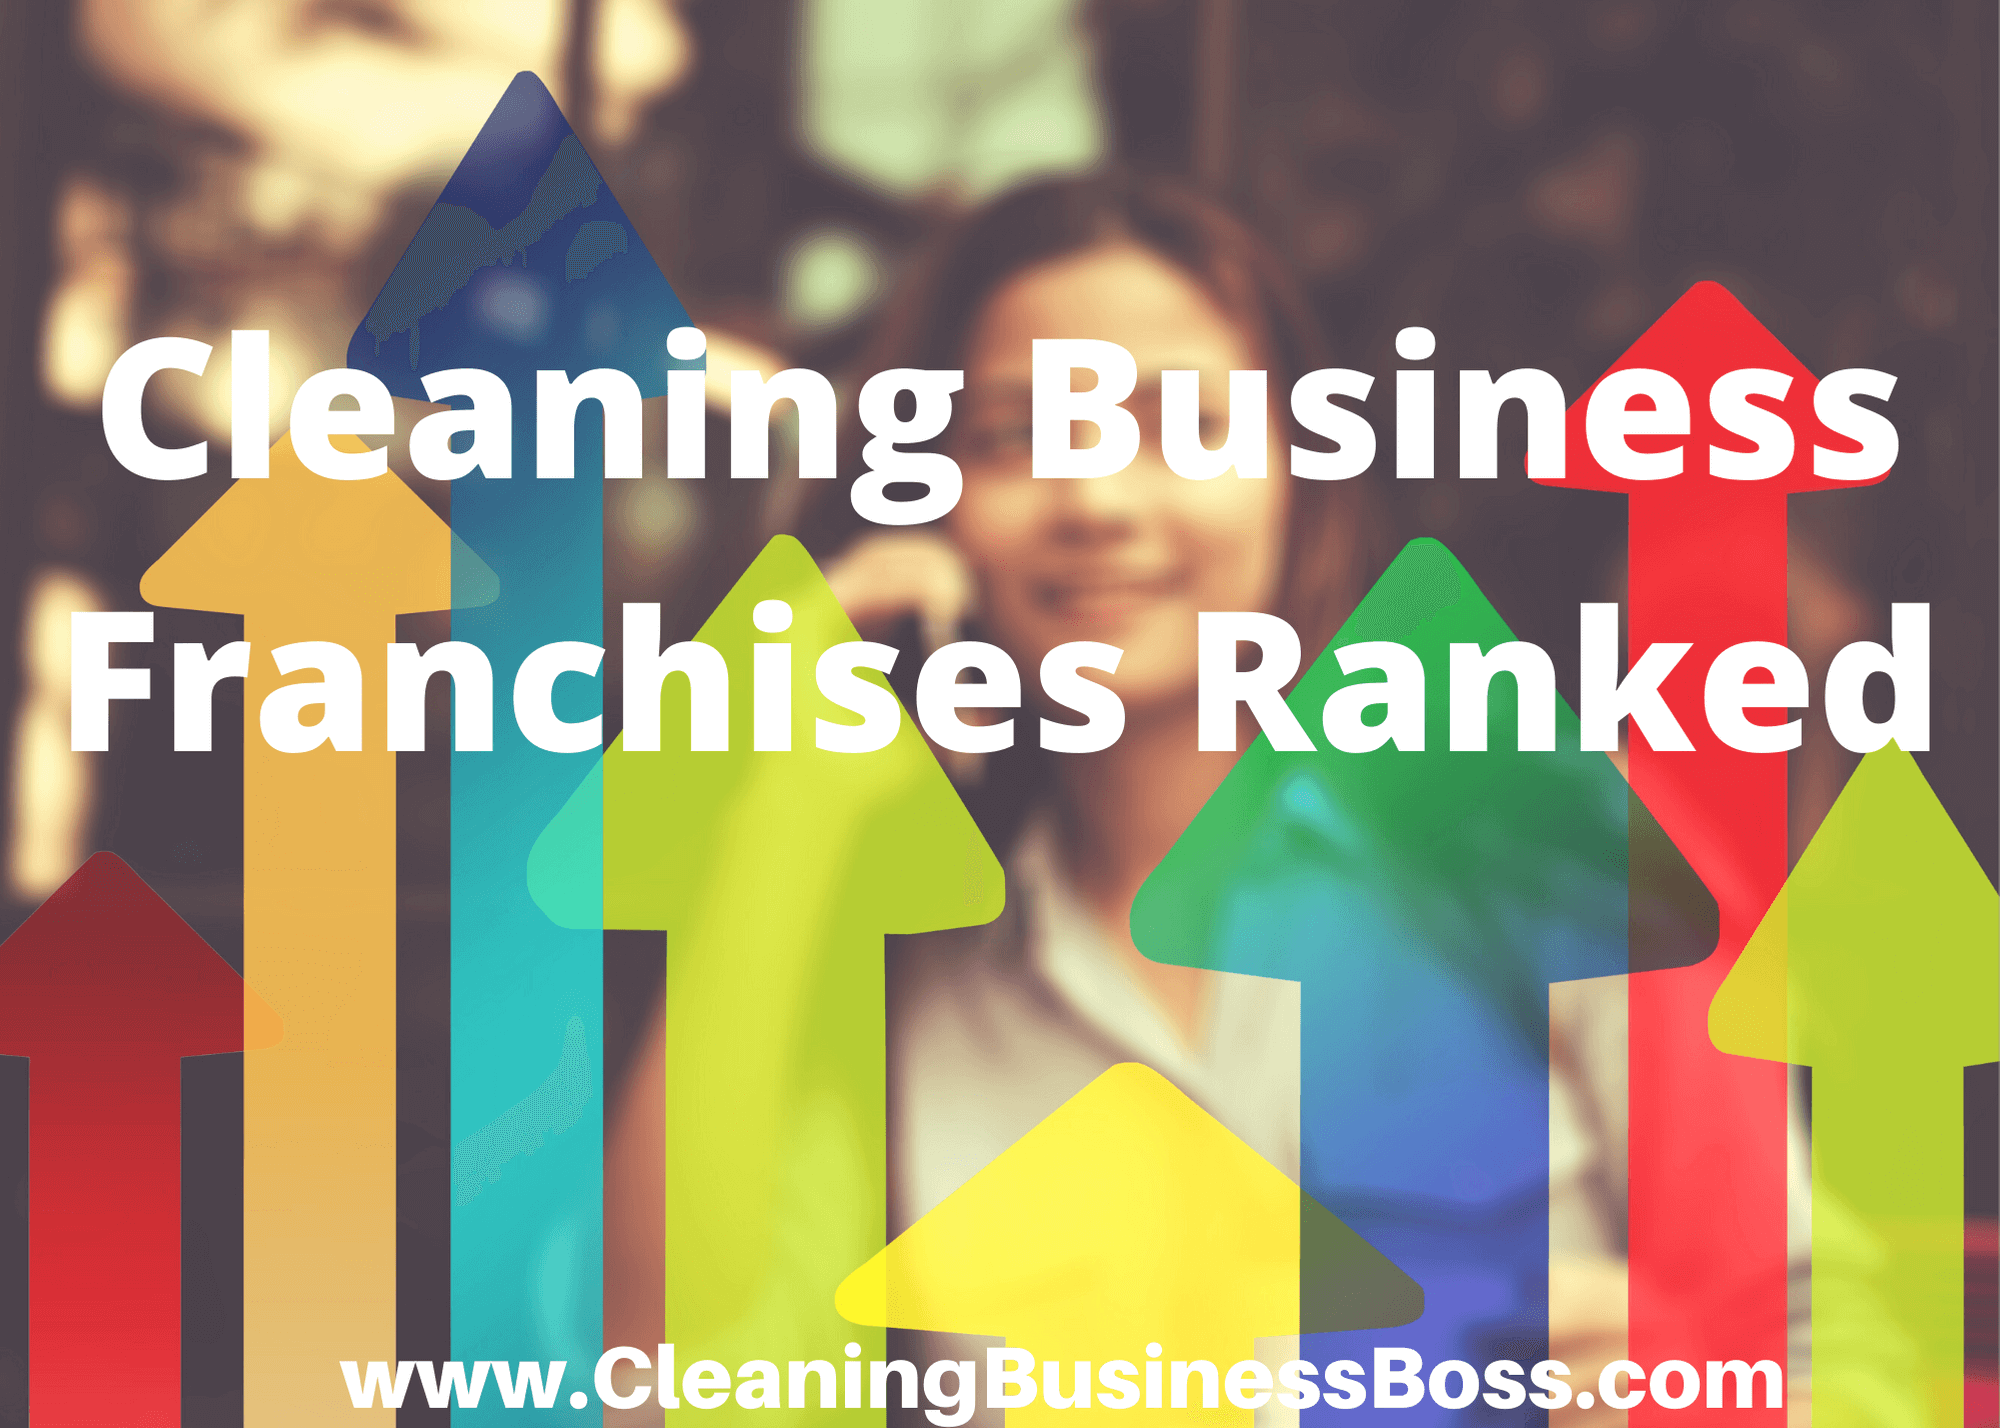 Cleaning Business Franchise Ranked